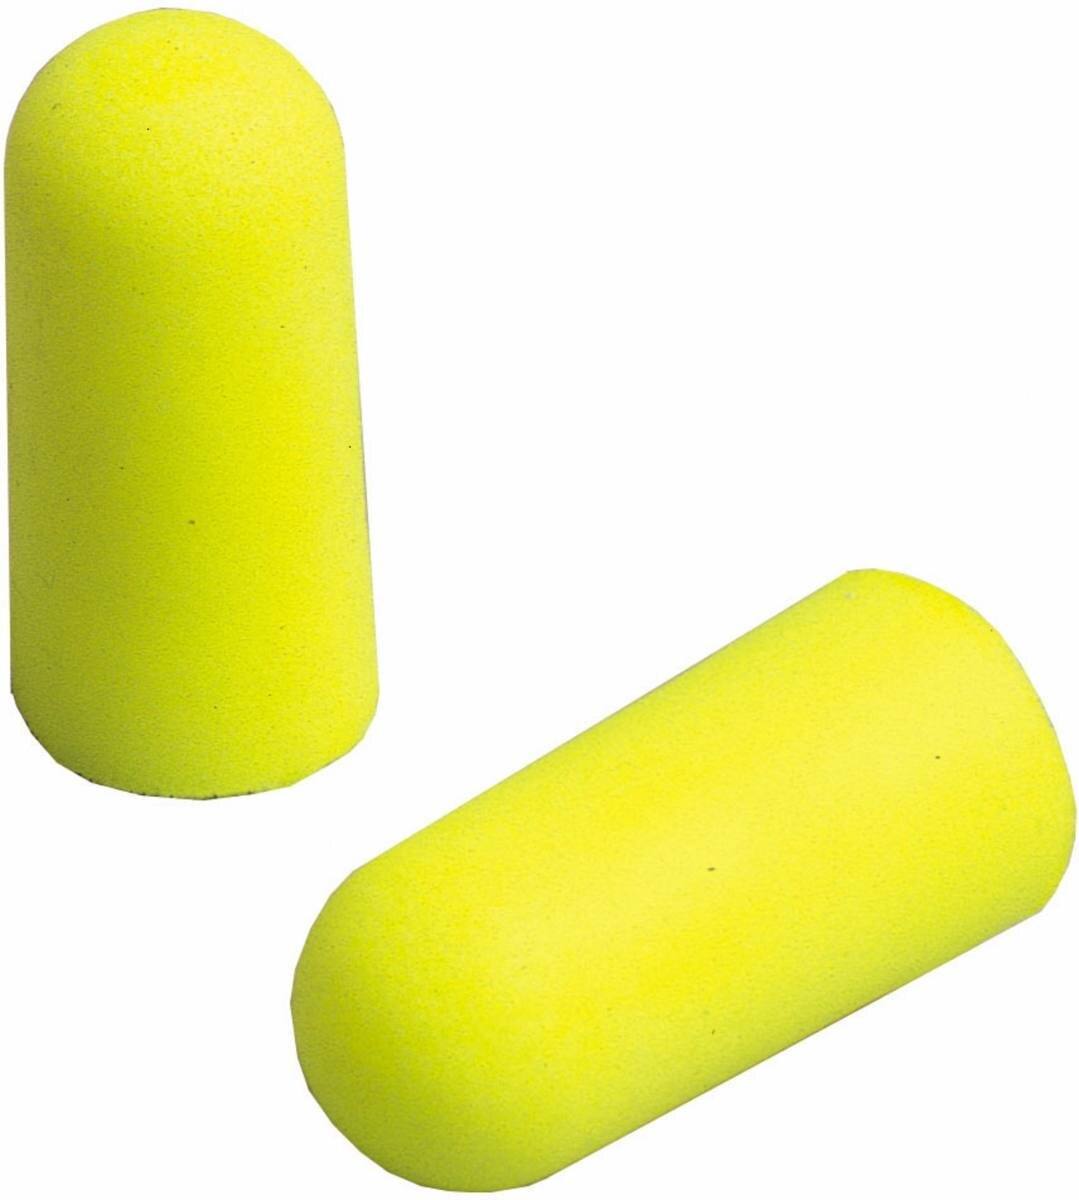 3M E-A-R Soft Yellow Neons, polyurethane, neon yellow, 5 pairs packed in resealable plastic bag with cardboard flap (Euro hole), SNR=36 dB, ES01001S